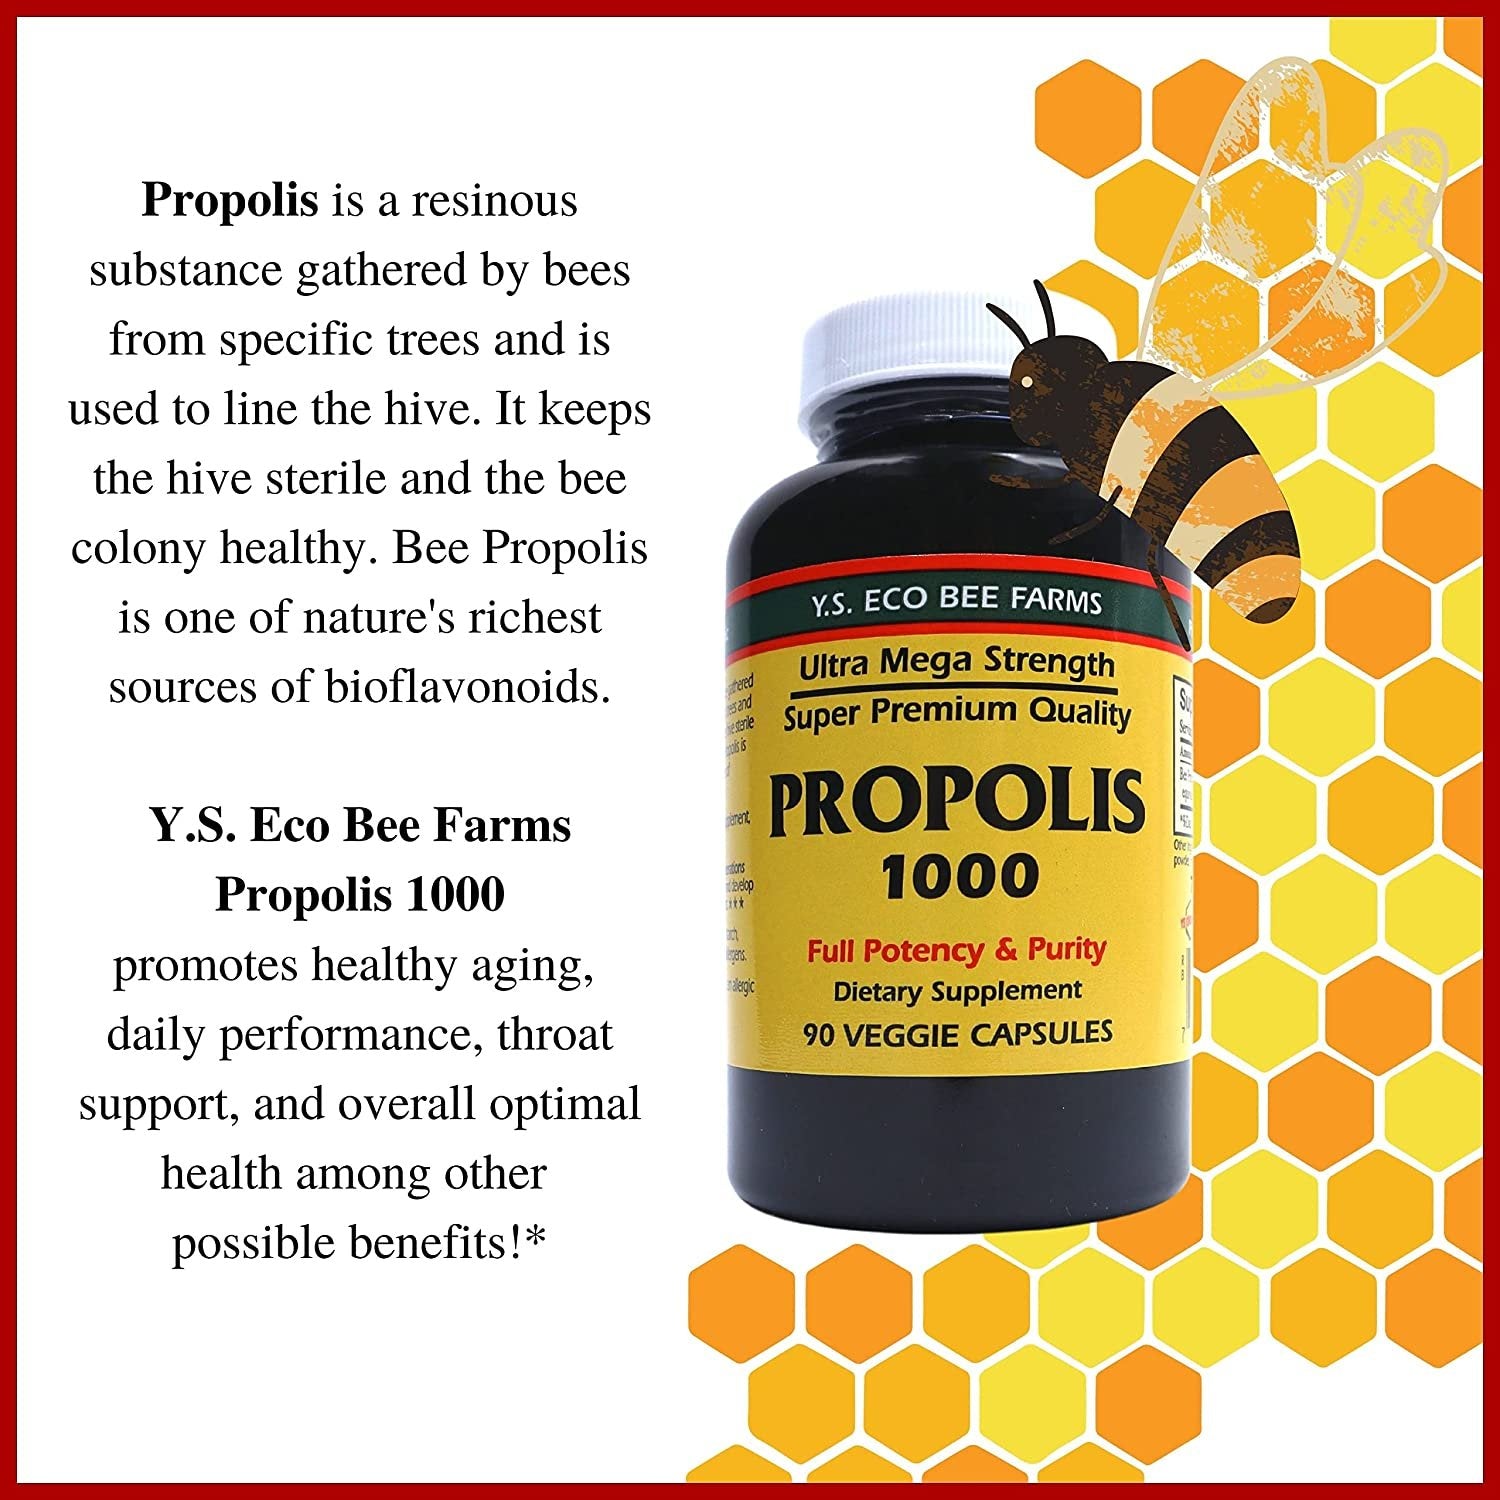 Y.S. Eco Bee Farms Ultra Mega Strength Propolis 1000 Dietary Supplement - 90 Ct Veggie Capsules - Organic Bee Pollen Supplement for Optimal Health and Wellness